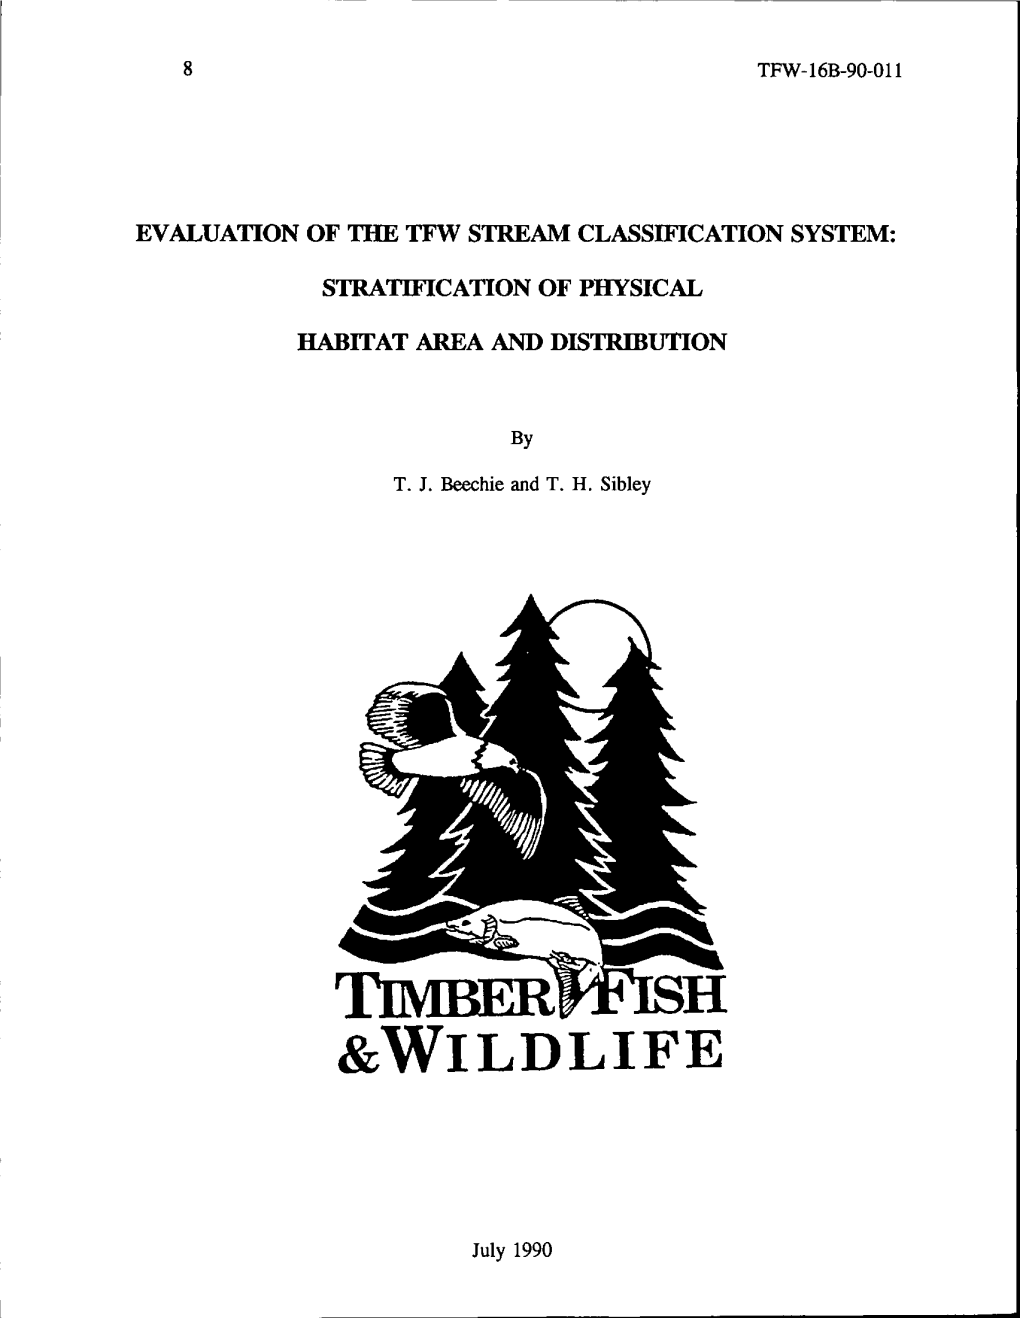 Evaluation of the Tfw Stream Classification System: Stratification of Physical Habitat Area and Distribution